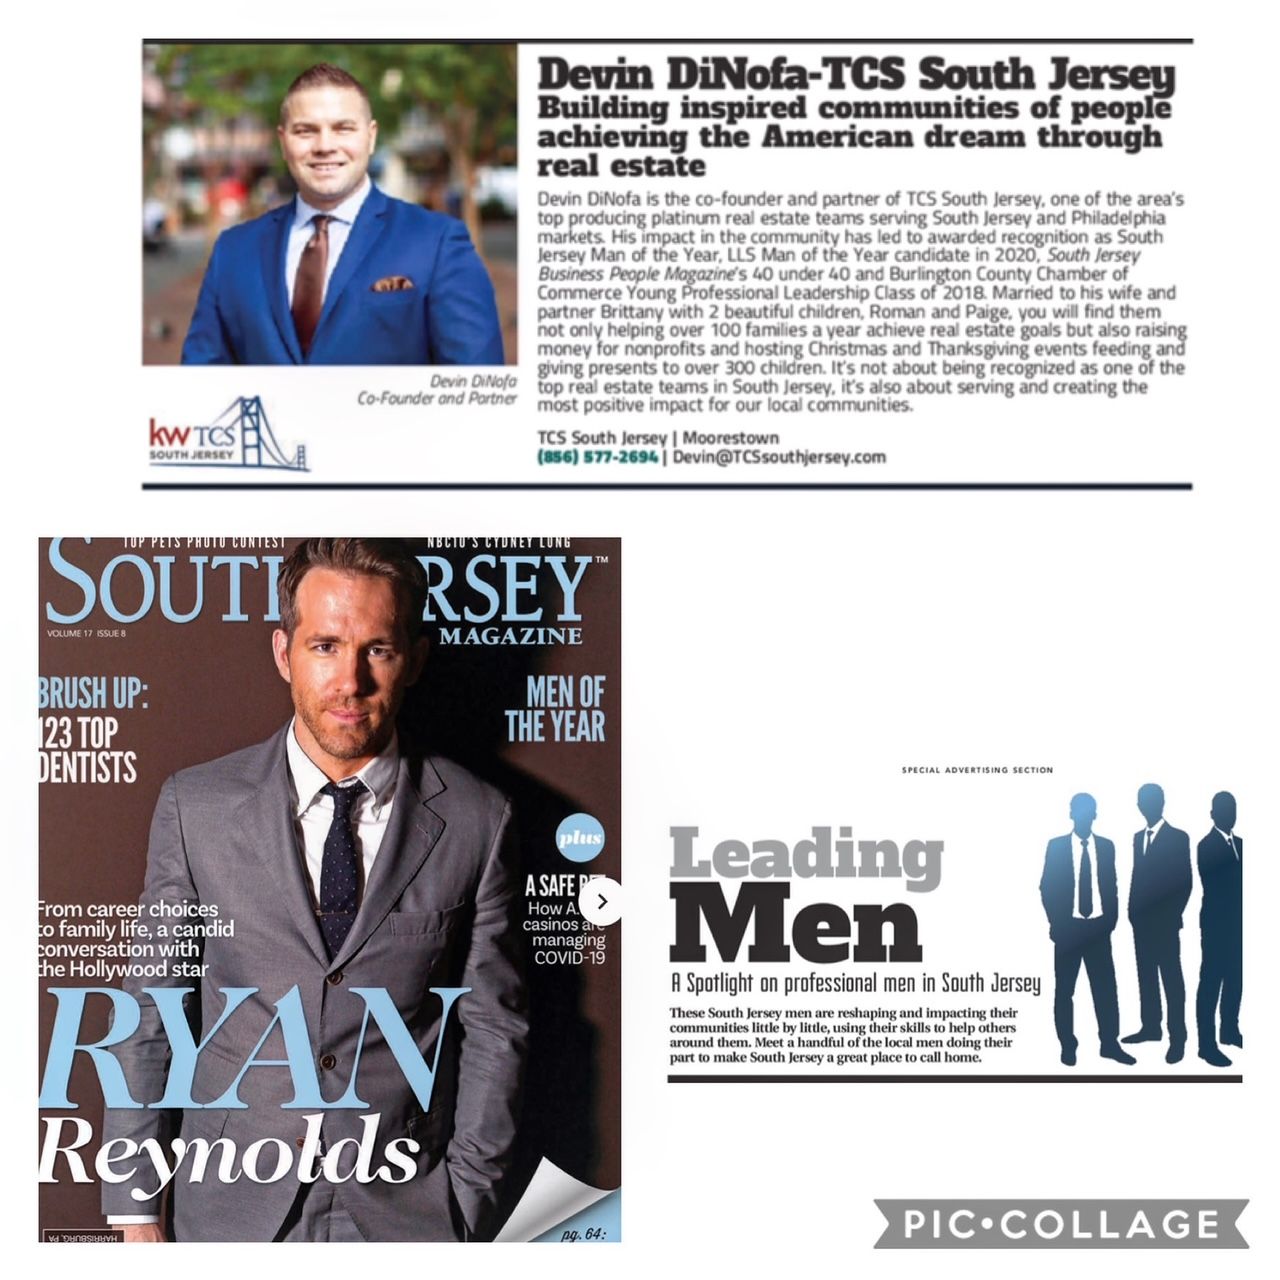 ryan reynolds is on the cover of south jersey magazine